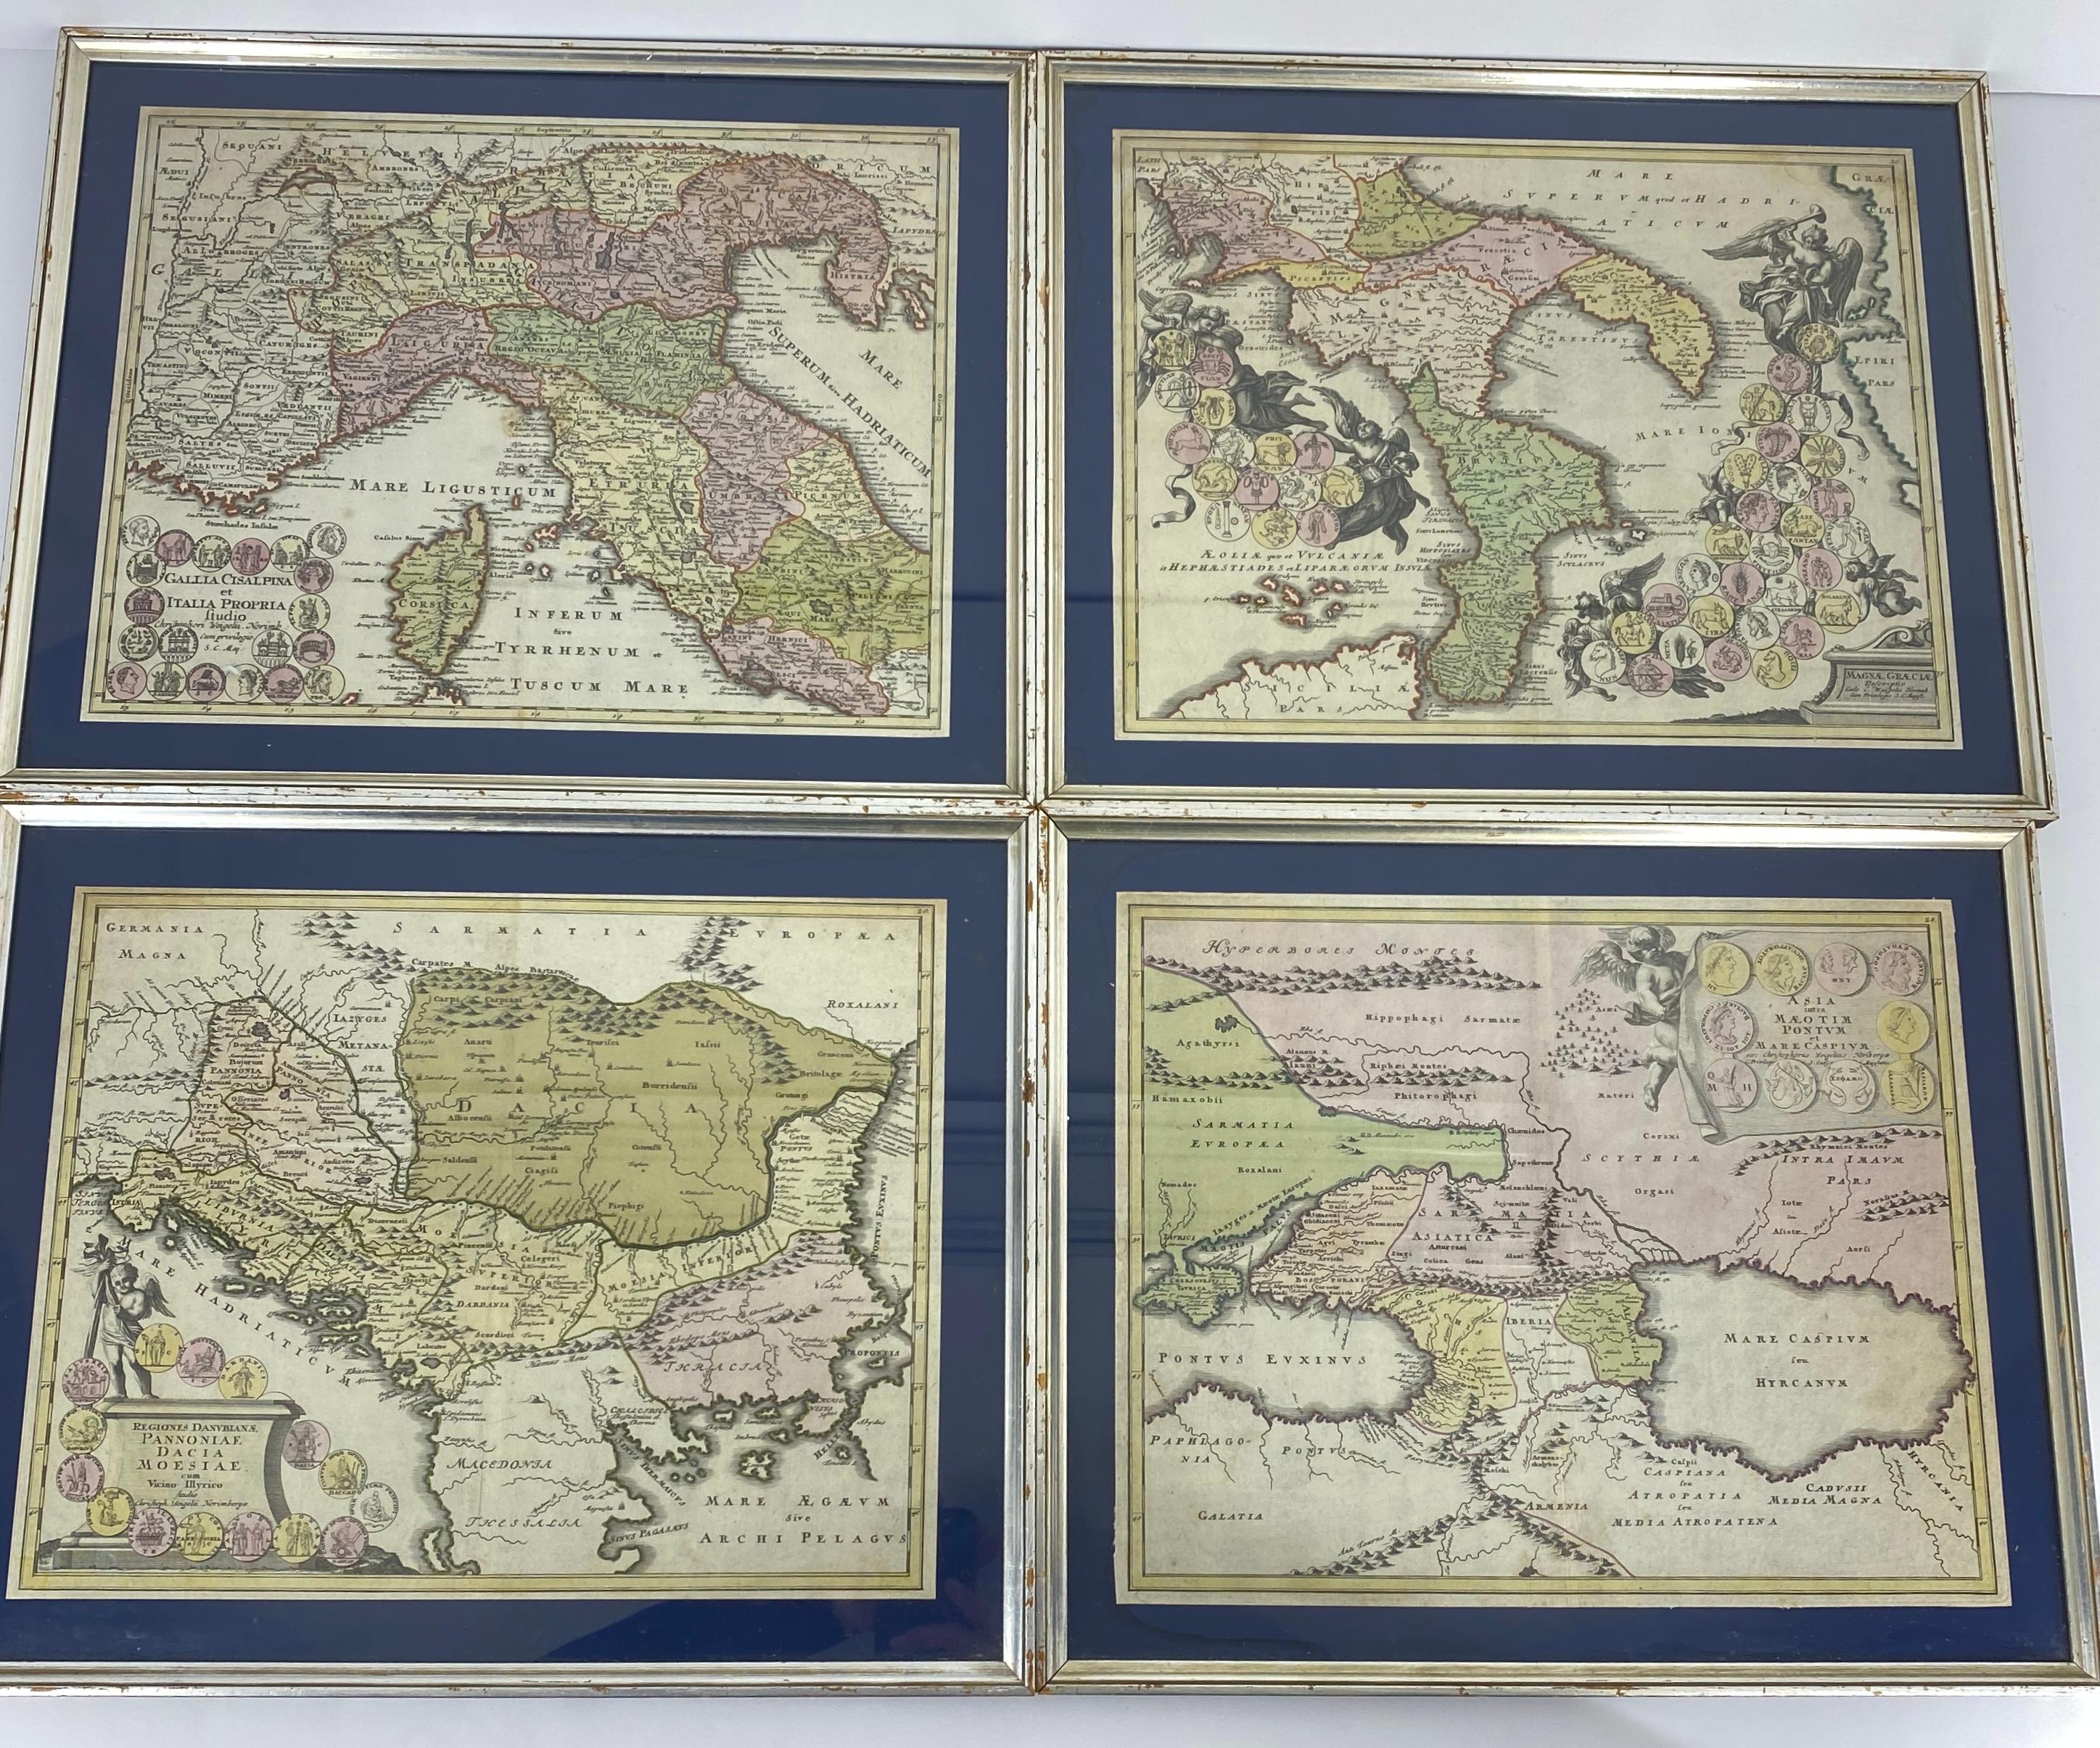 Paper Set Of 4 Silver Gilded Framed Maps Of Italy And Danube In Blue Passe-Partout